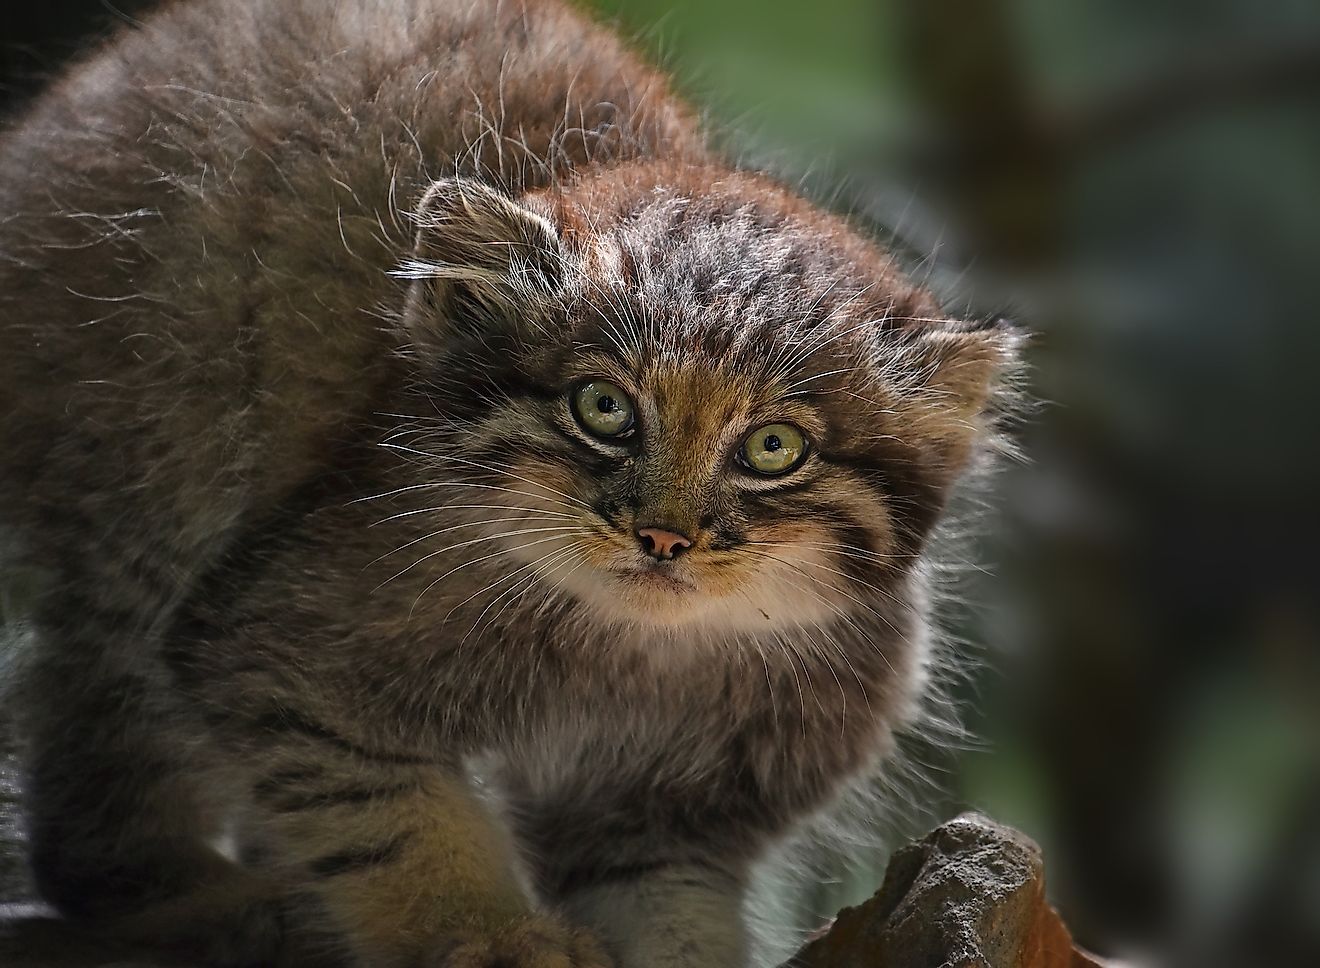 Close up portrait of a kitten of Pallas's cat, one of the 33 species of small wild cats.